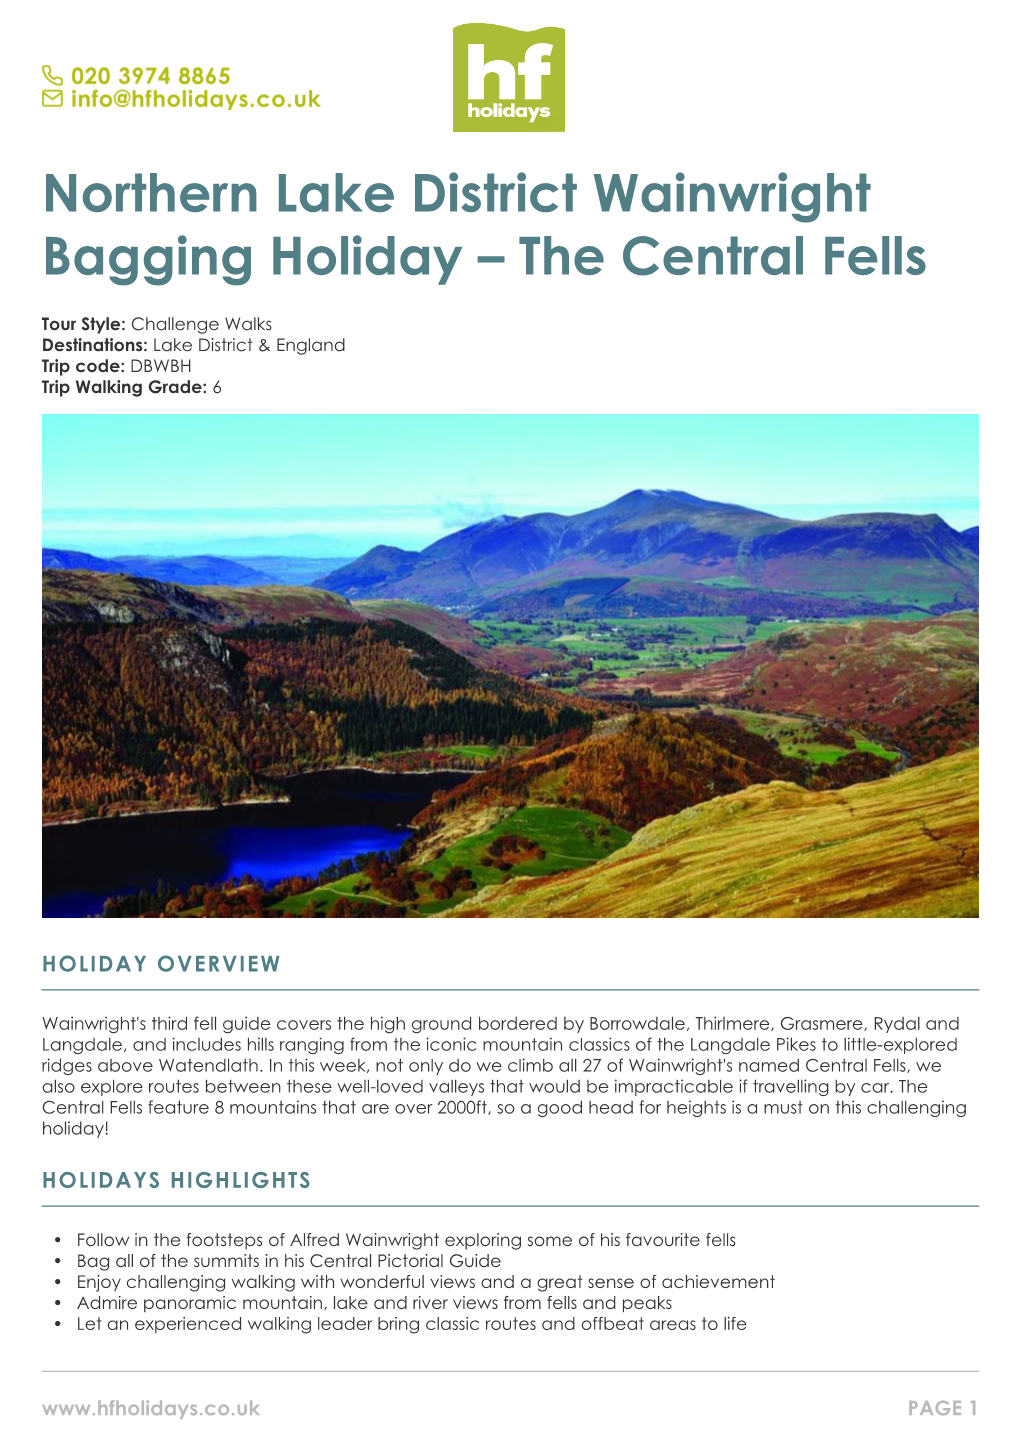 Northern Lake District Wainwright Bagging Holiday – the Central Fells